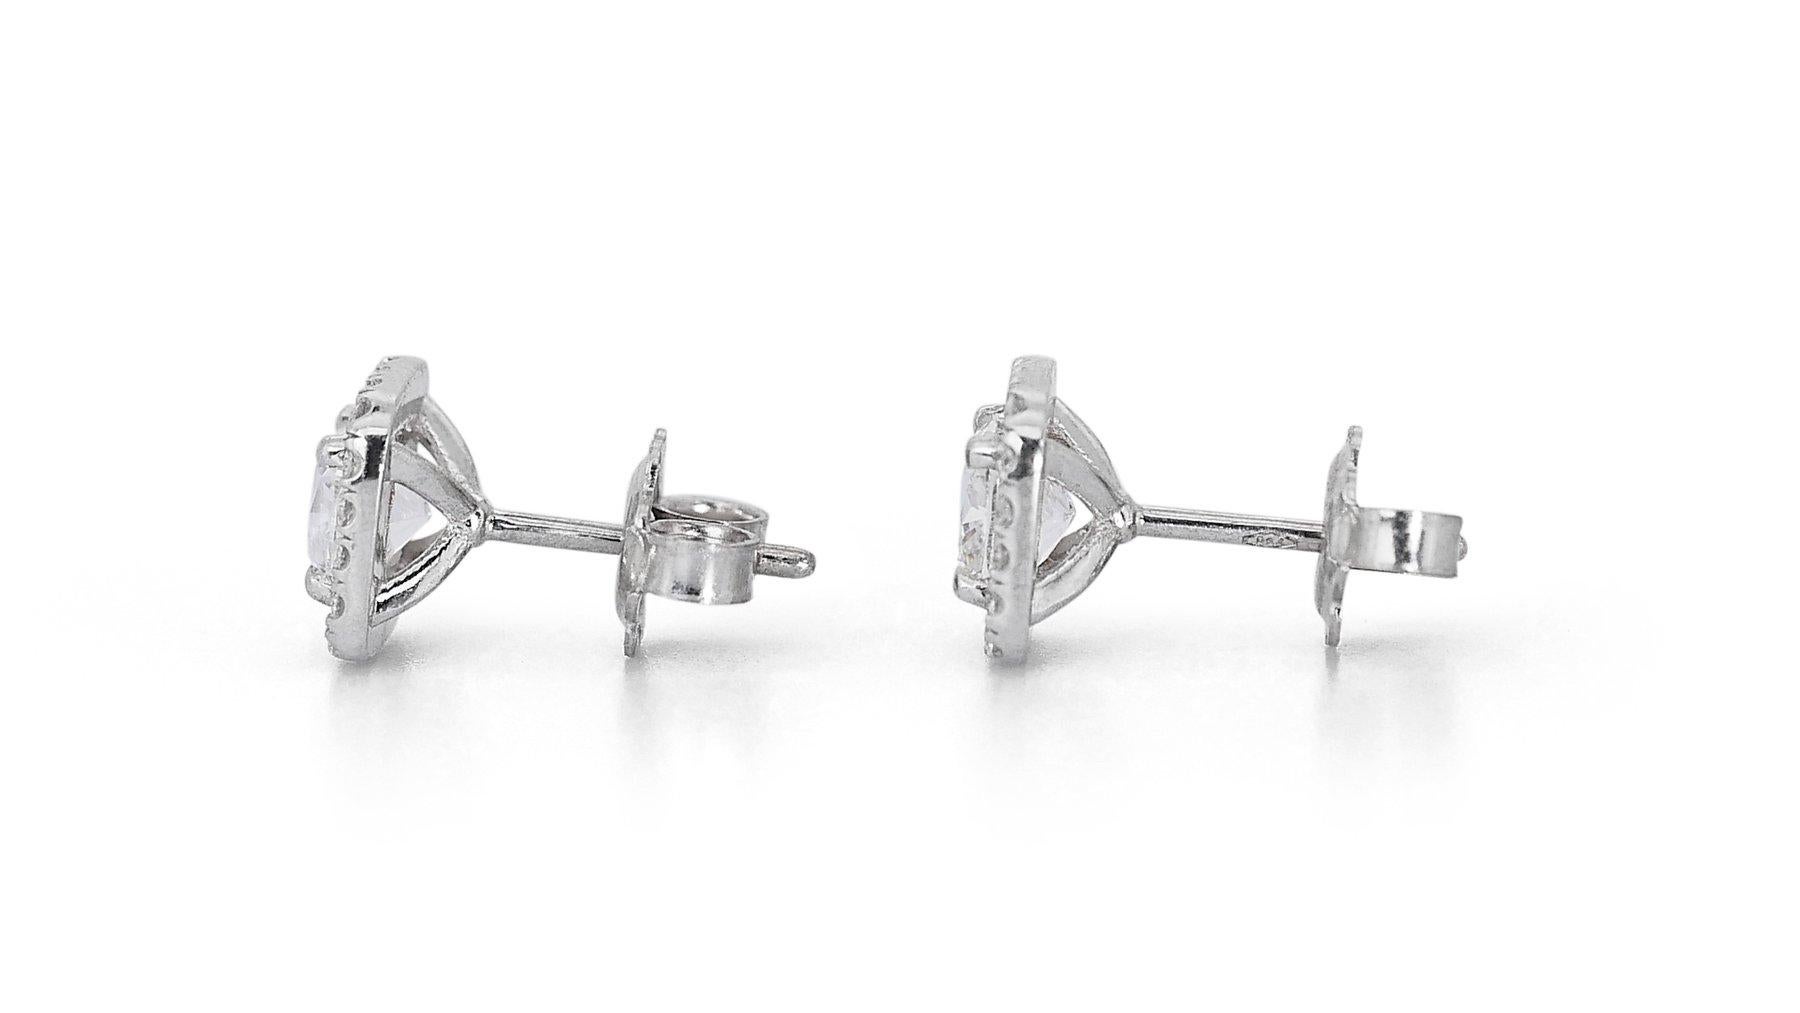 Stunning 2.33ct Diamond Halo Stud Earrings in 18k White Gold - GIA Certified For Sale 1